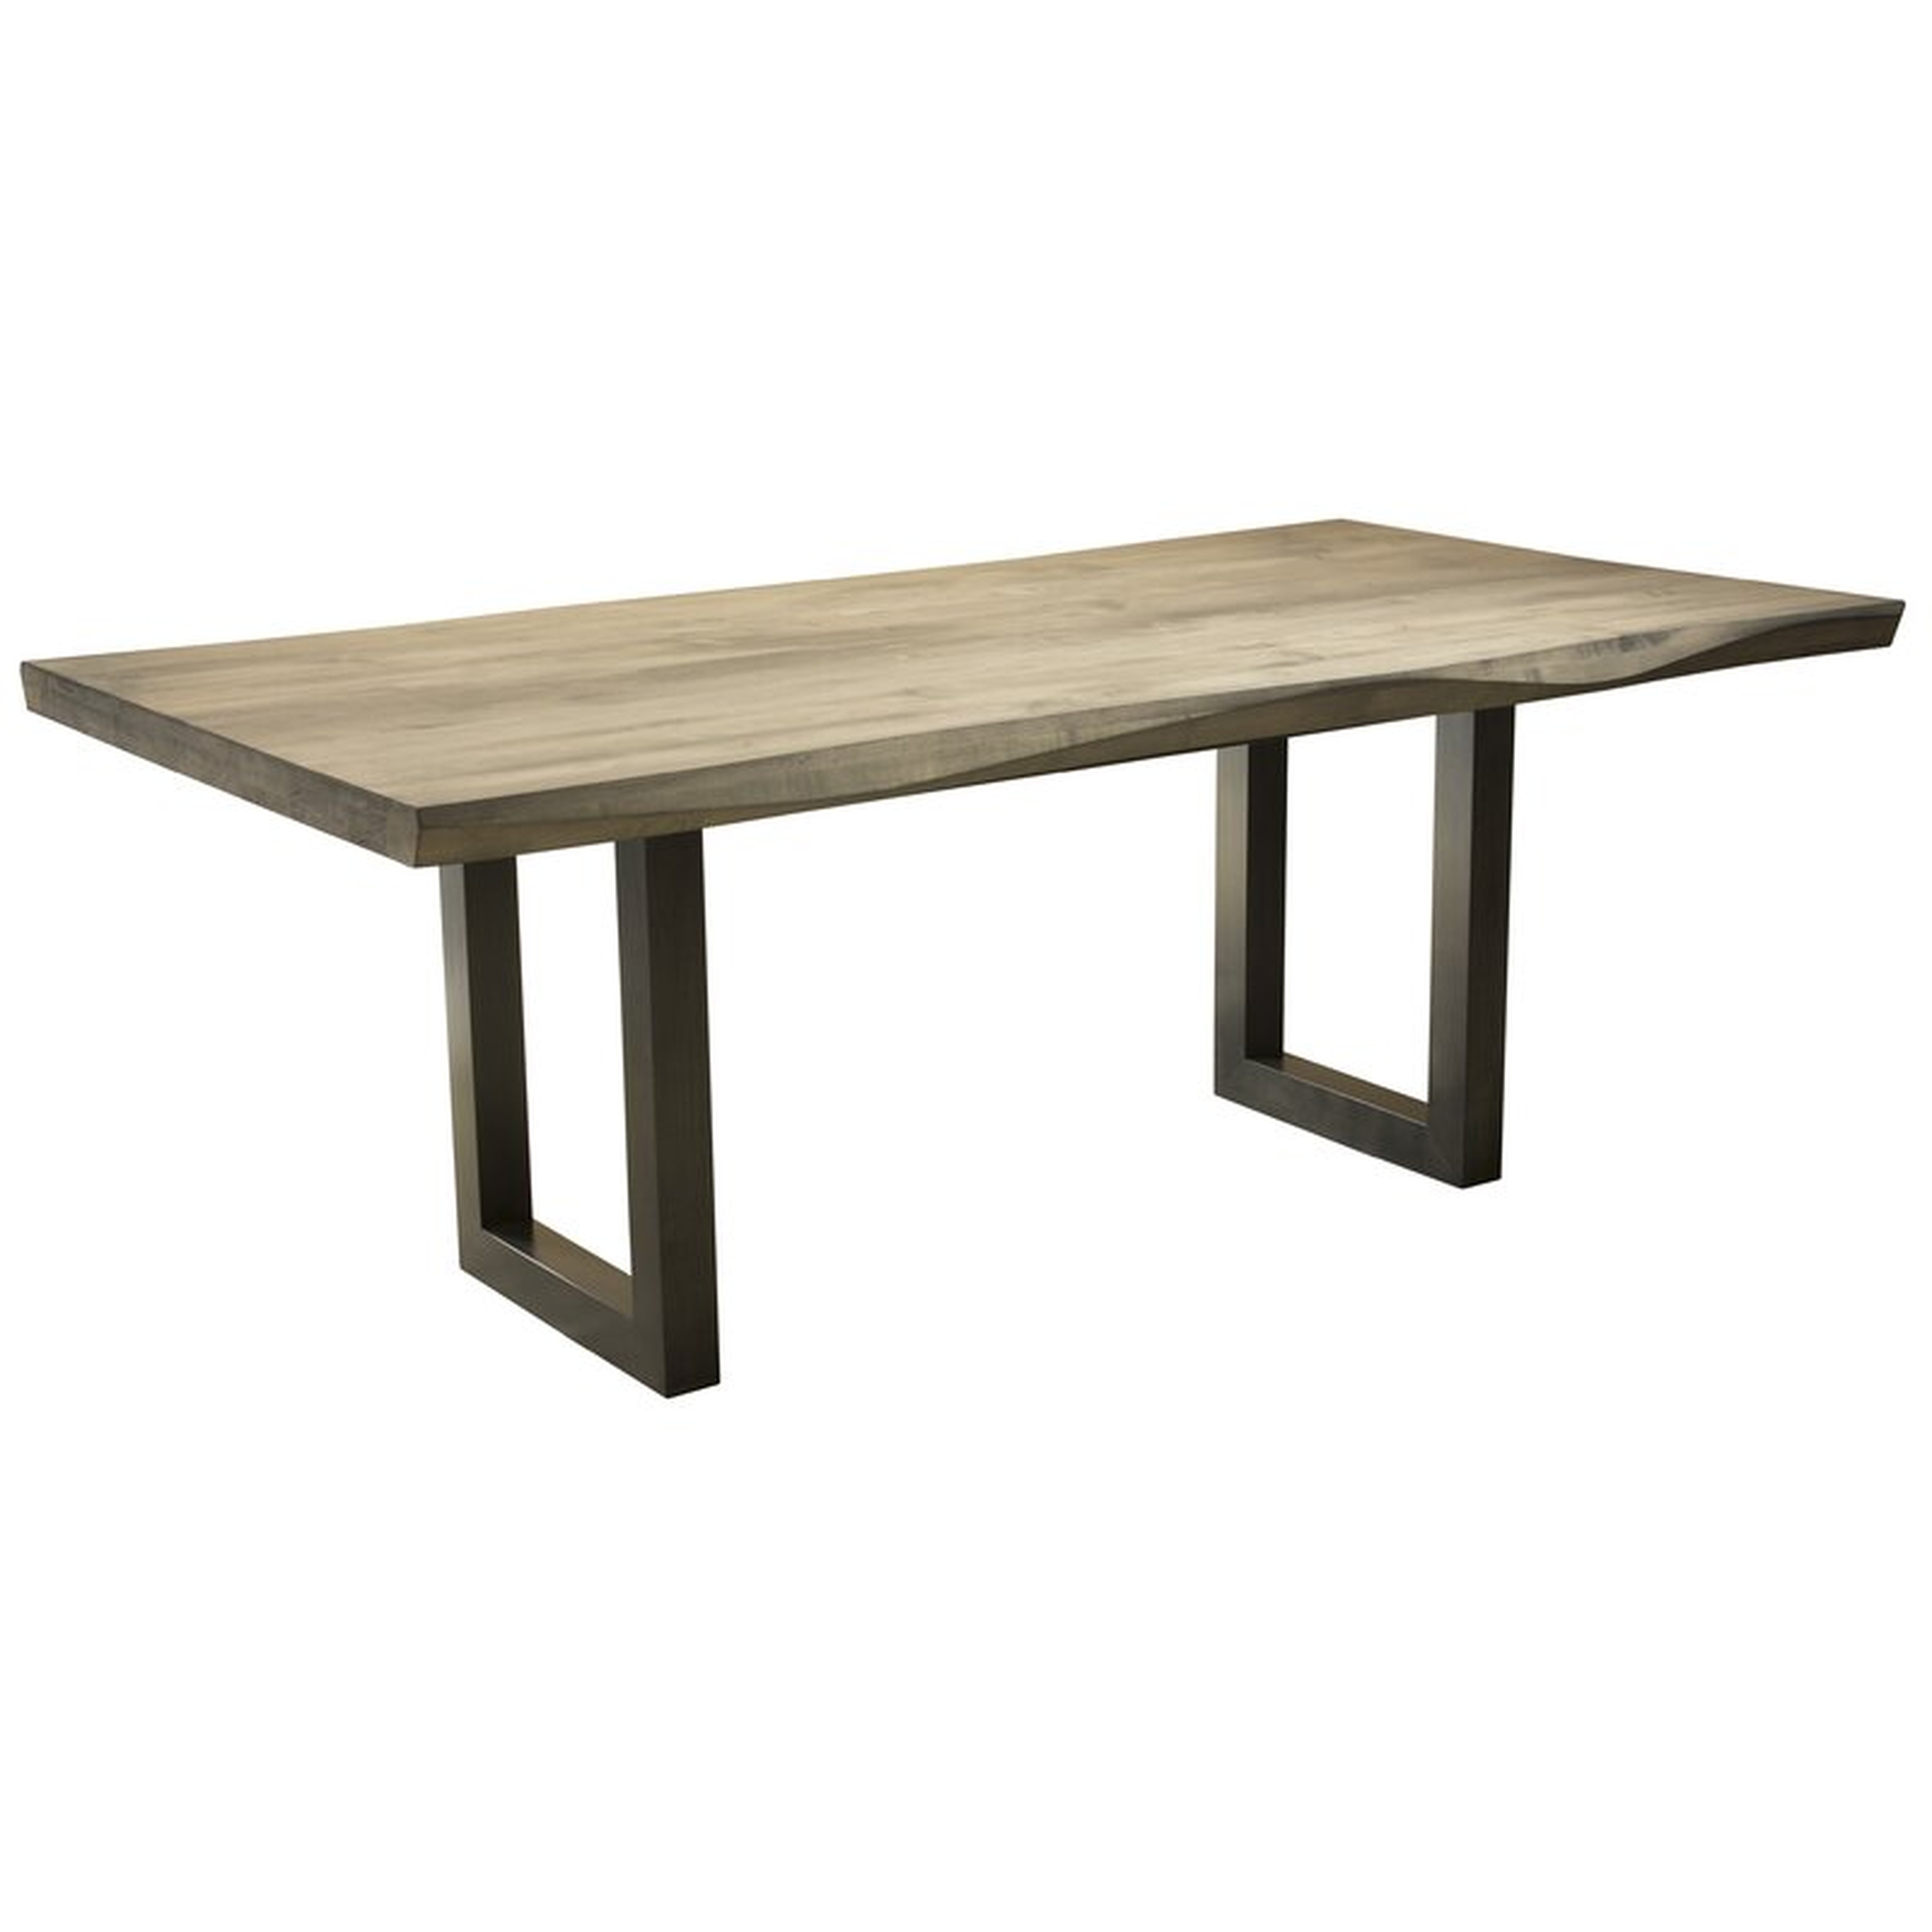 Fusco Sculpted Edge Solid Wood Dining Table Size: 29" H x 72" W x 42" D, Color: Java - Perigold